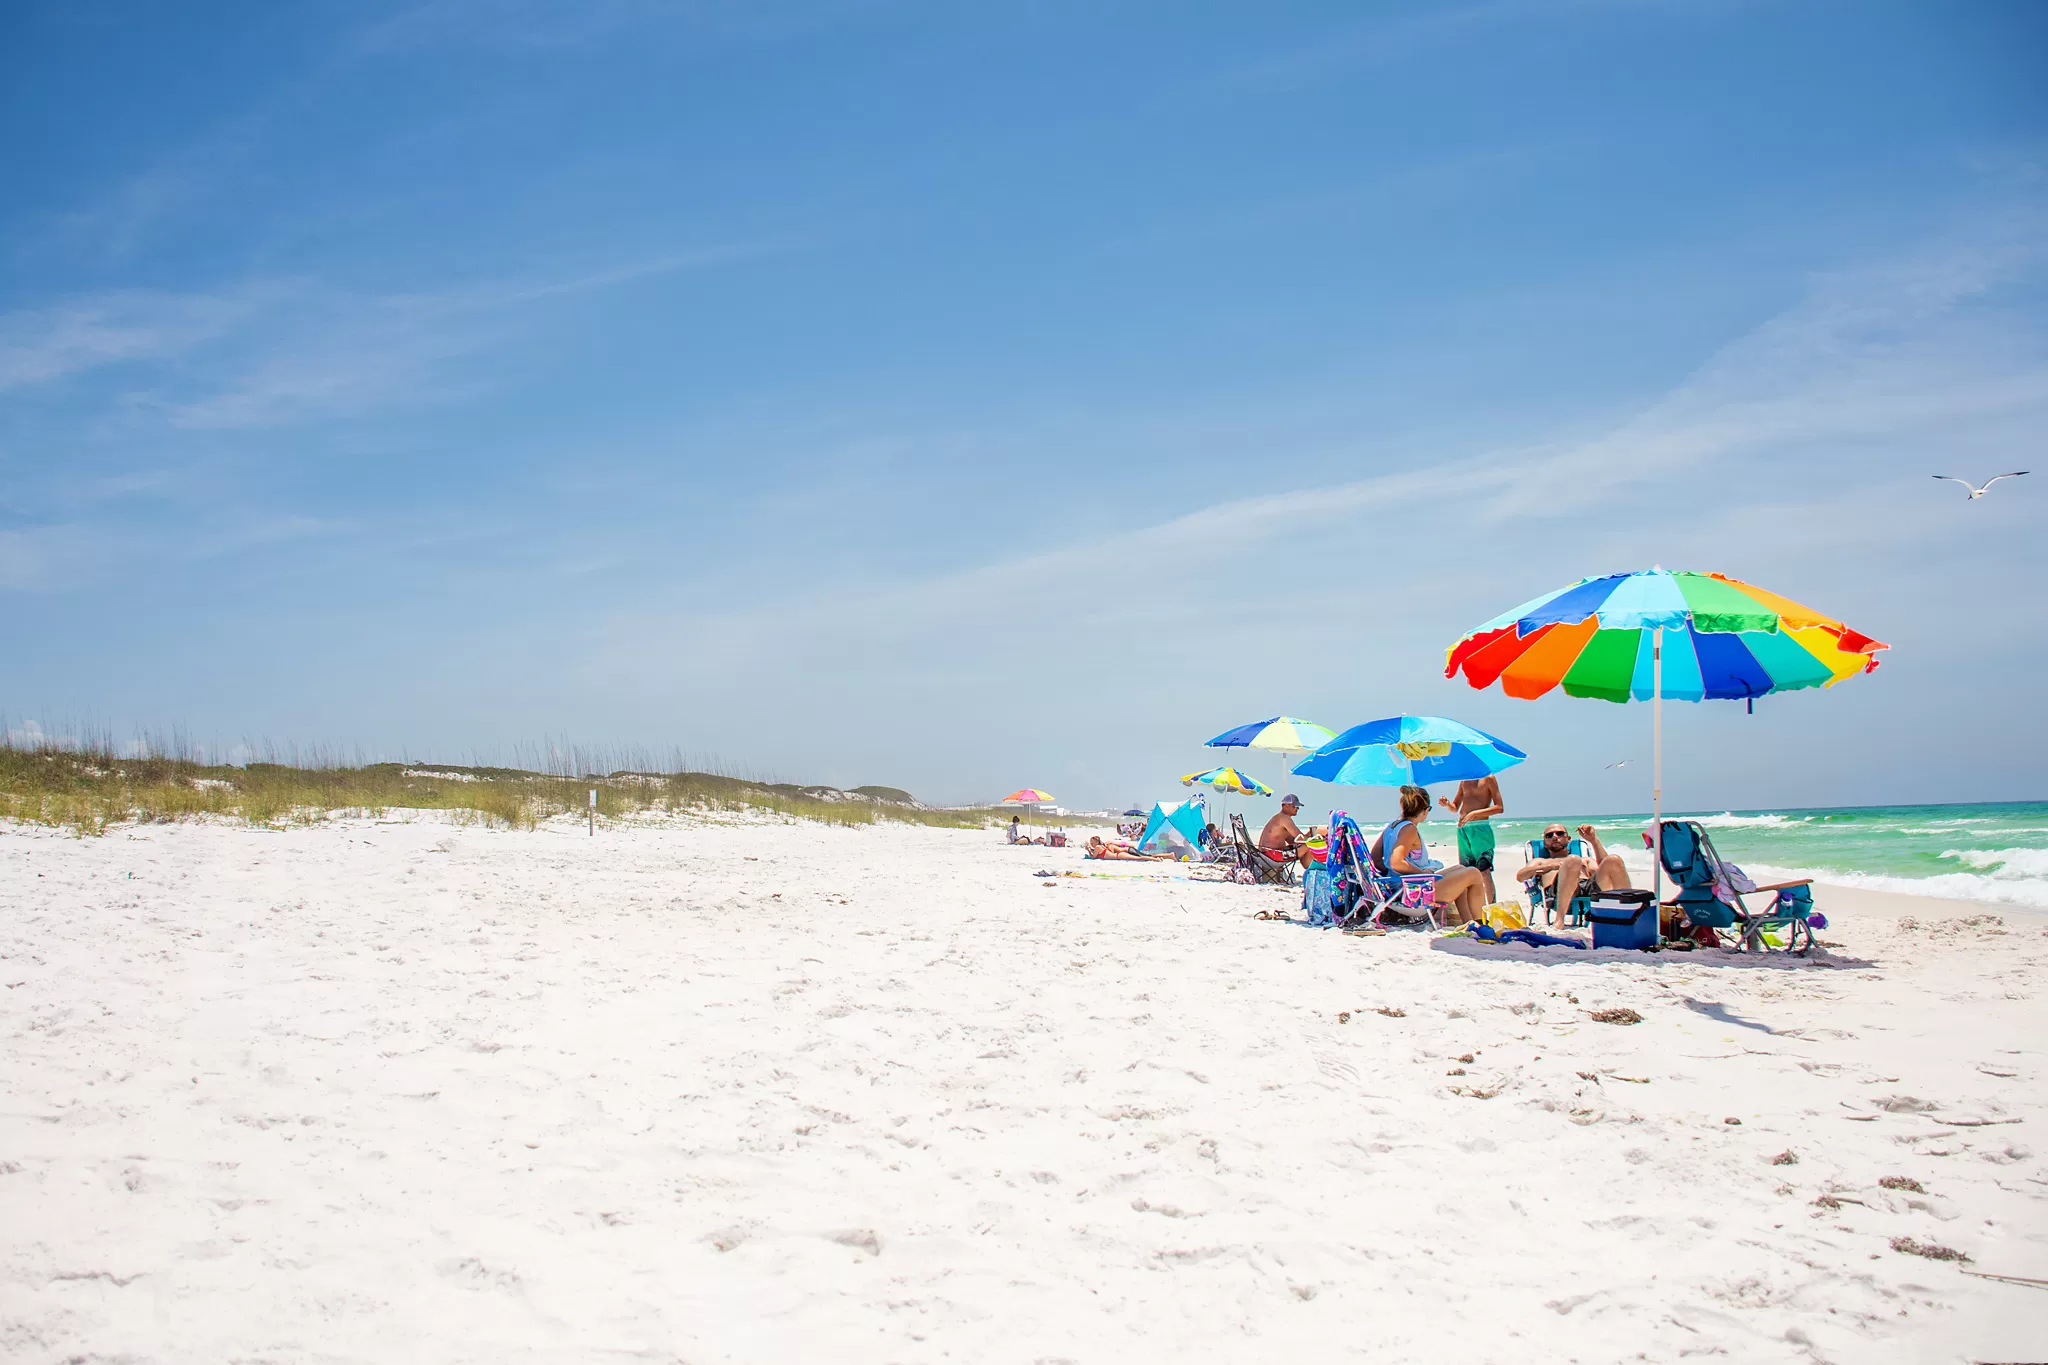 30a day trips travel guide with photo of brightcolored beach umbrellas on white sand beaches